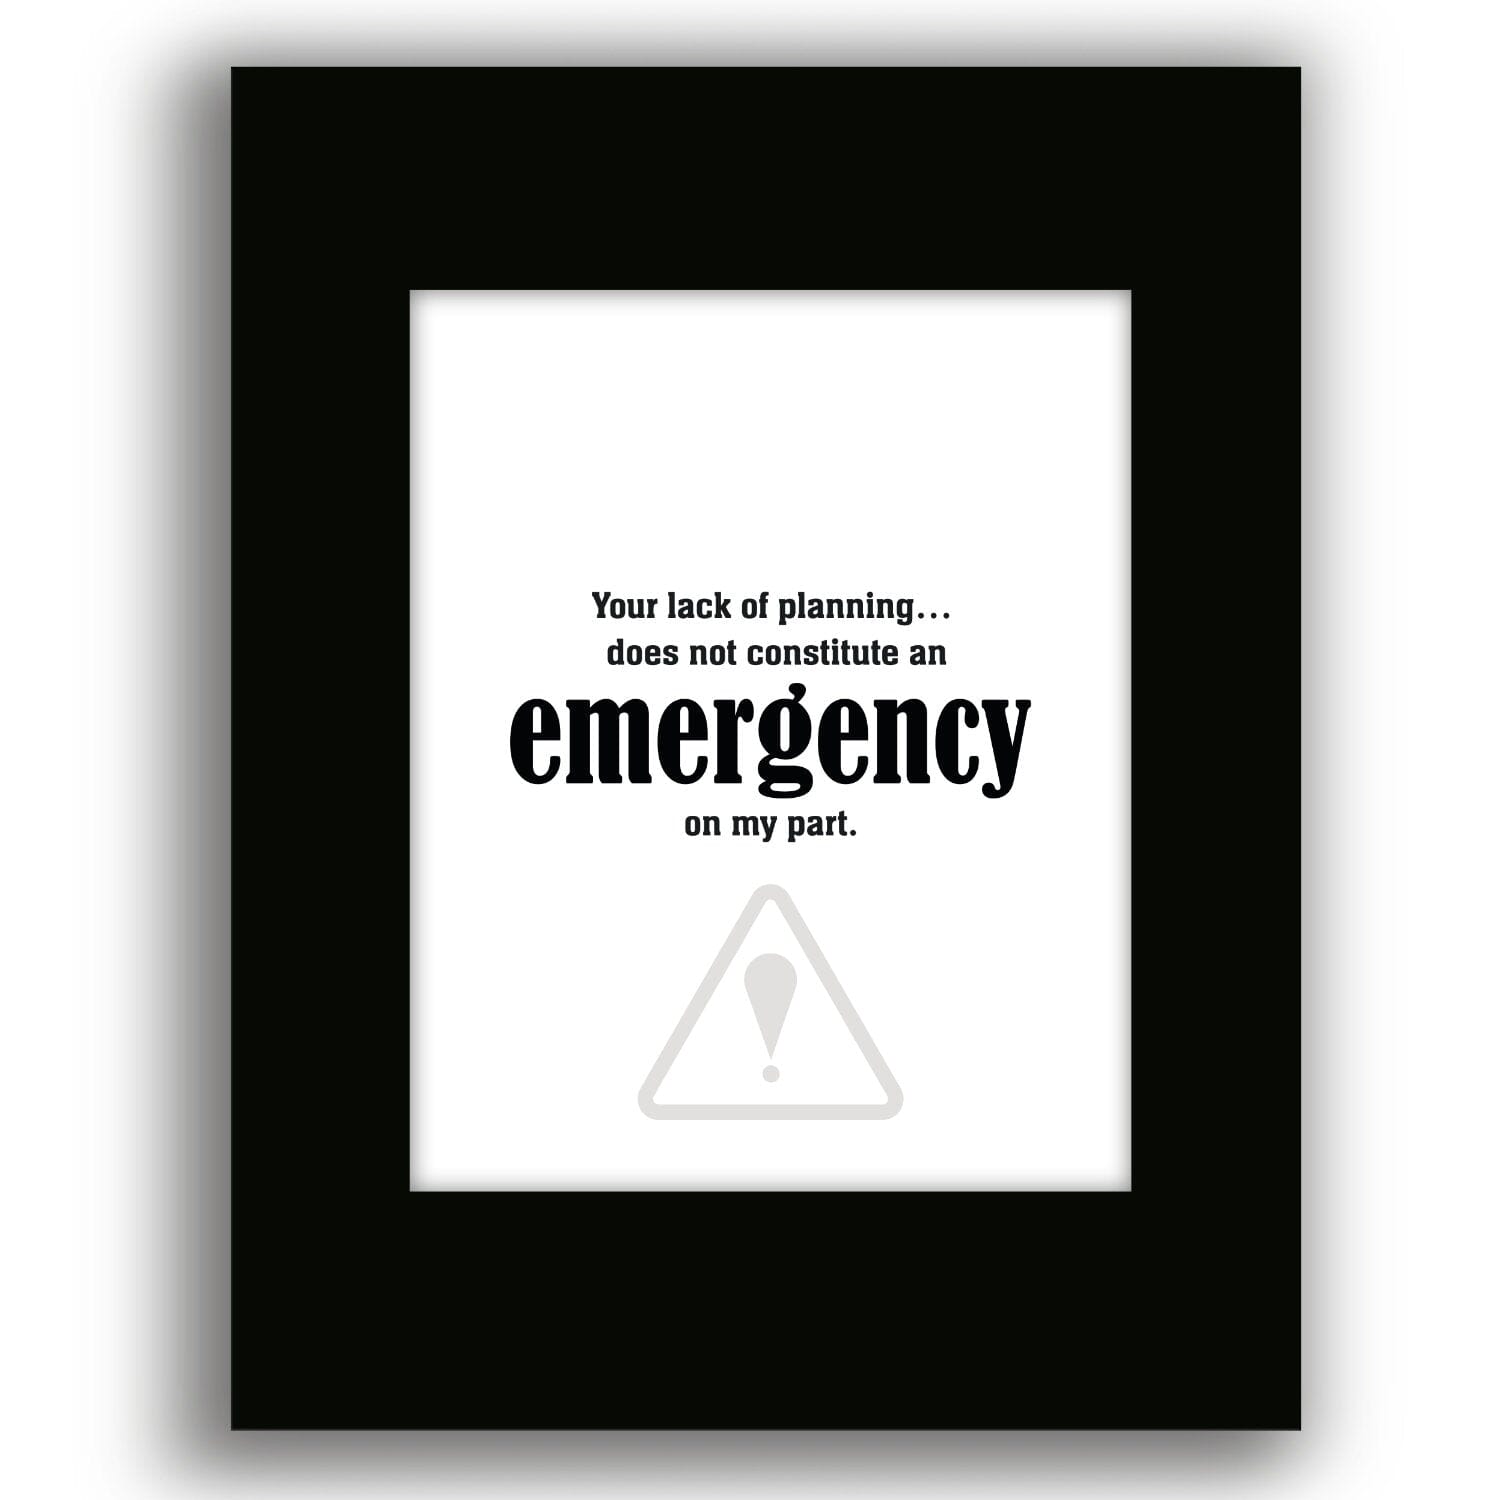 Your Lack of Planning Does Not Constitute an Emergency Wise and Wiseass Quotes Song Lyrics Art 8x10 Black Matted Print 